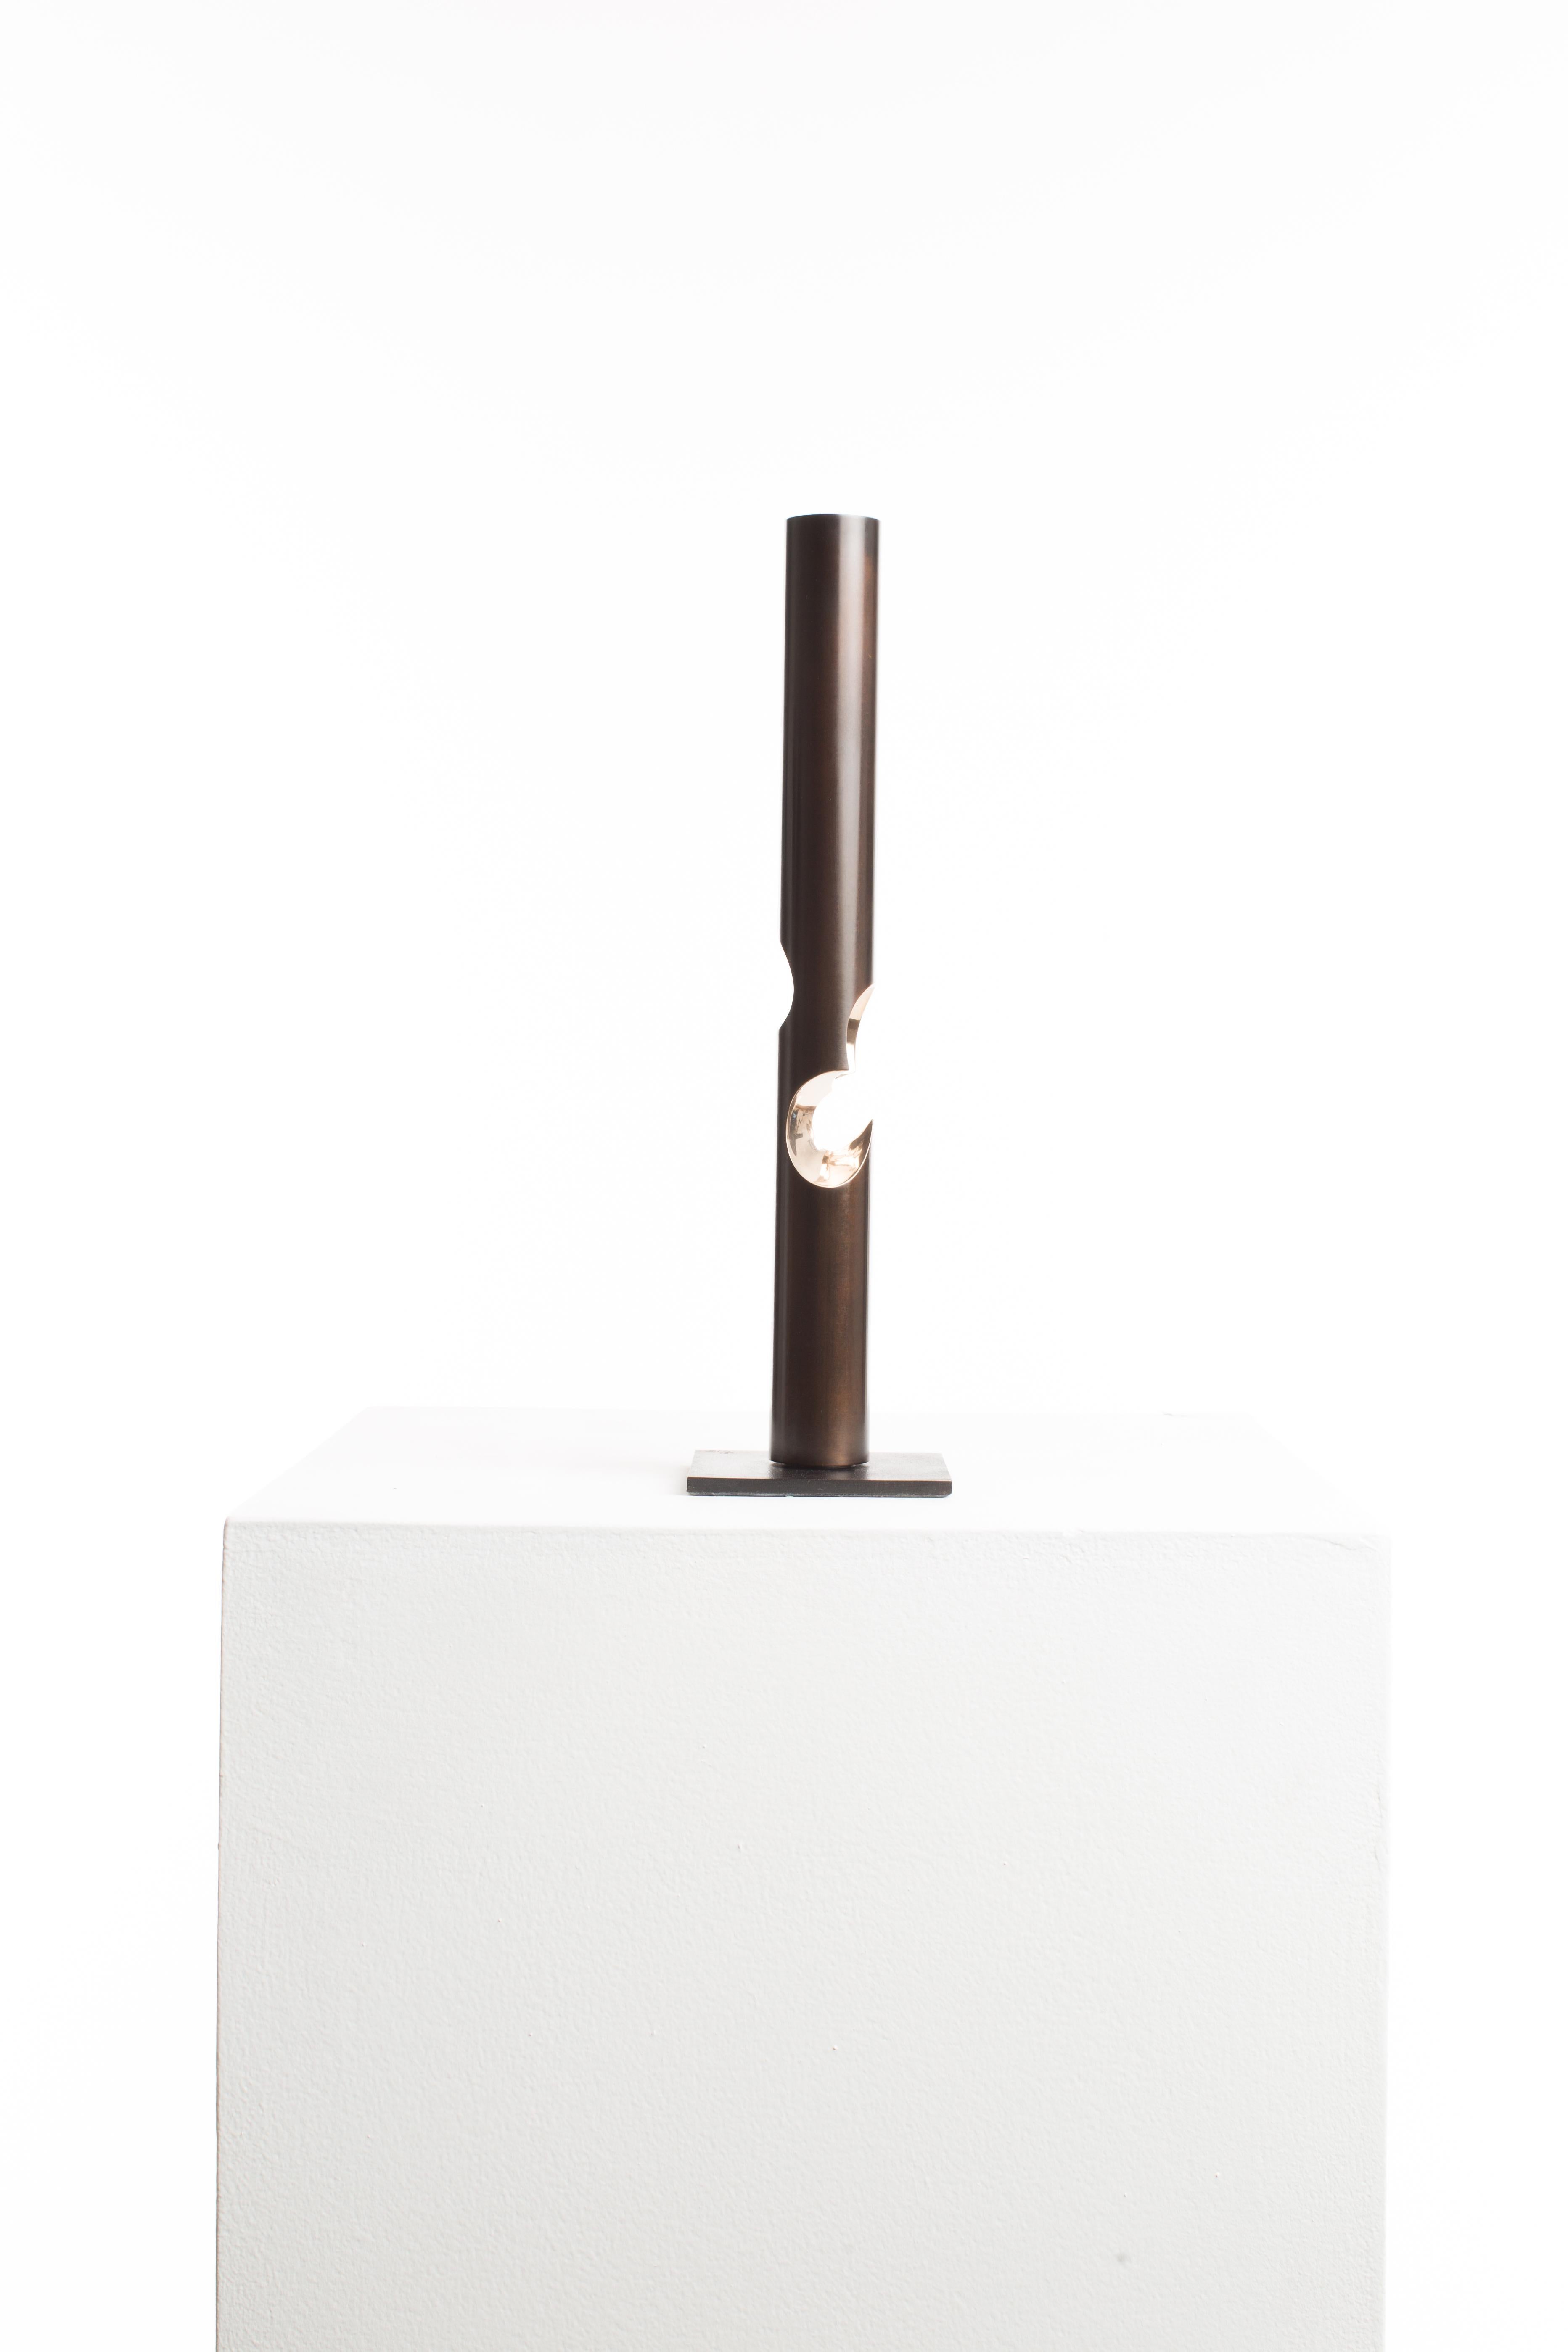 Candle Holder 003 
1/10
Bronze
10cm x 10cm x 37cm 
3.30Kg
2019

Crystalized Sculptures is an abstracted exploration of marks left on the physical mind by experiences of emotion and feelings. In Driaan Claassens' work, where whisps portray the